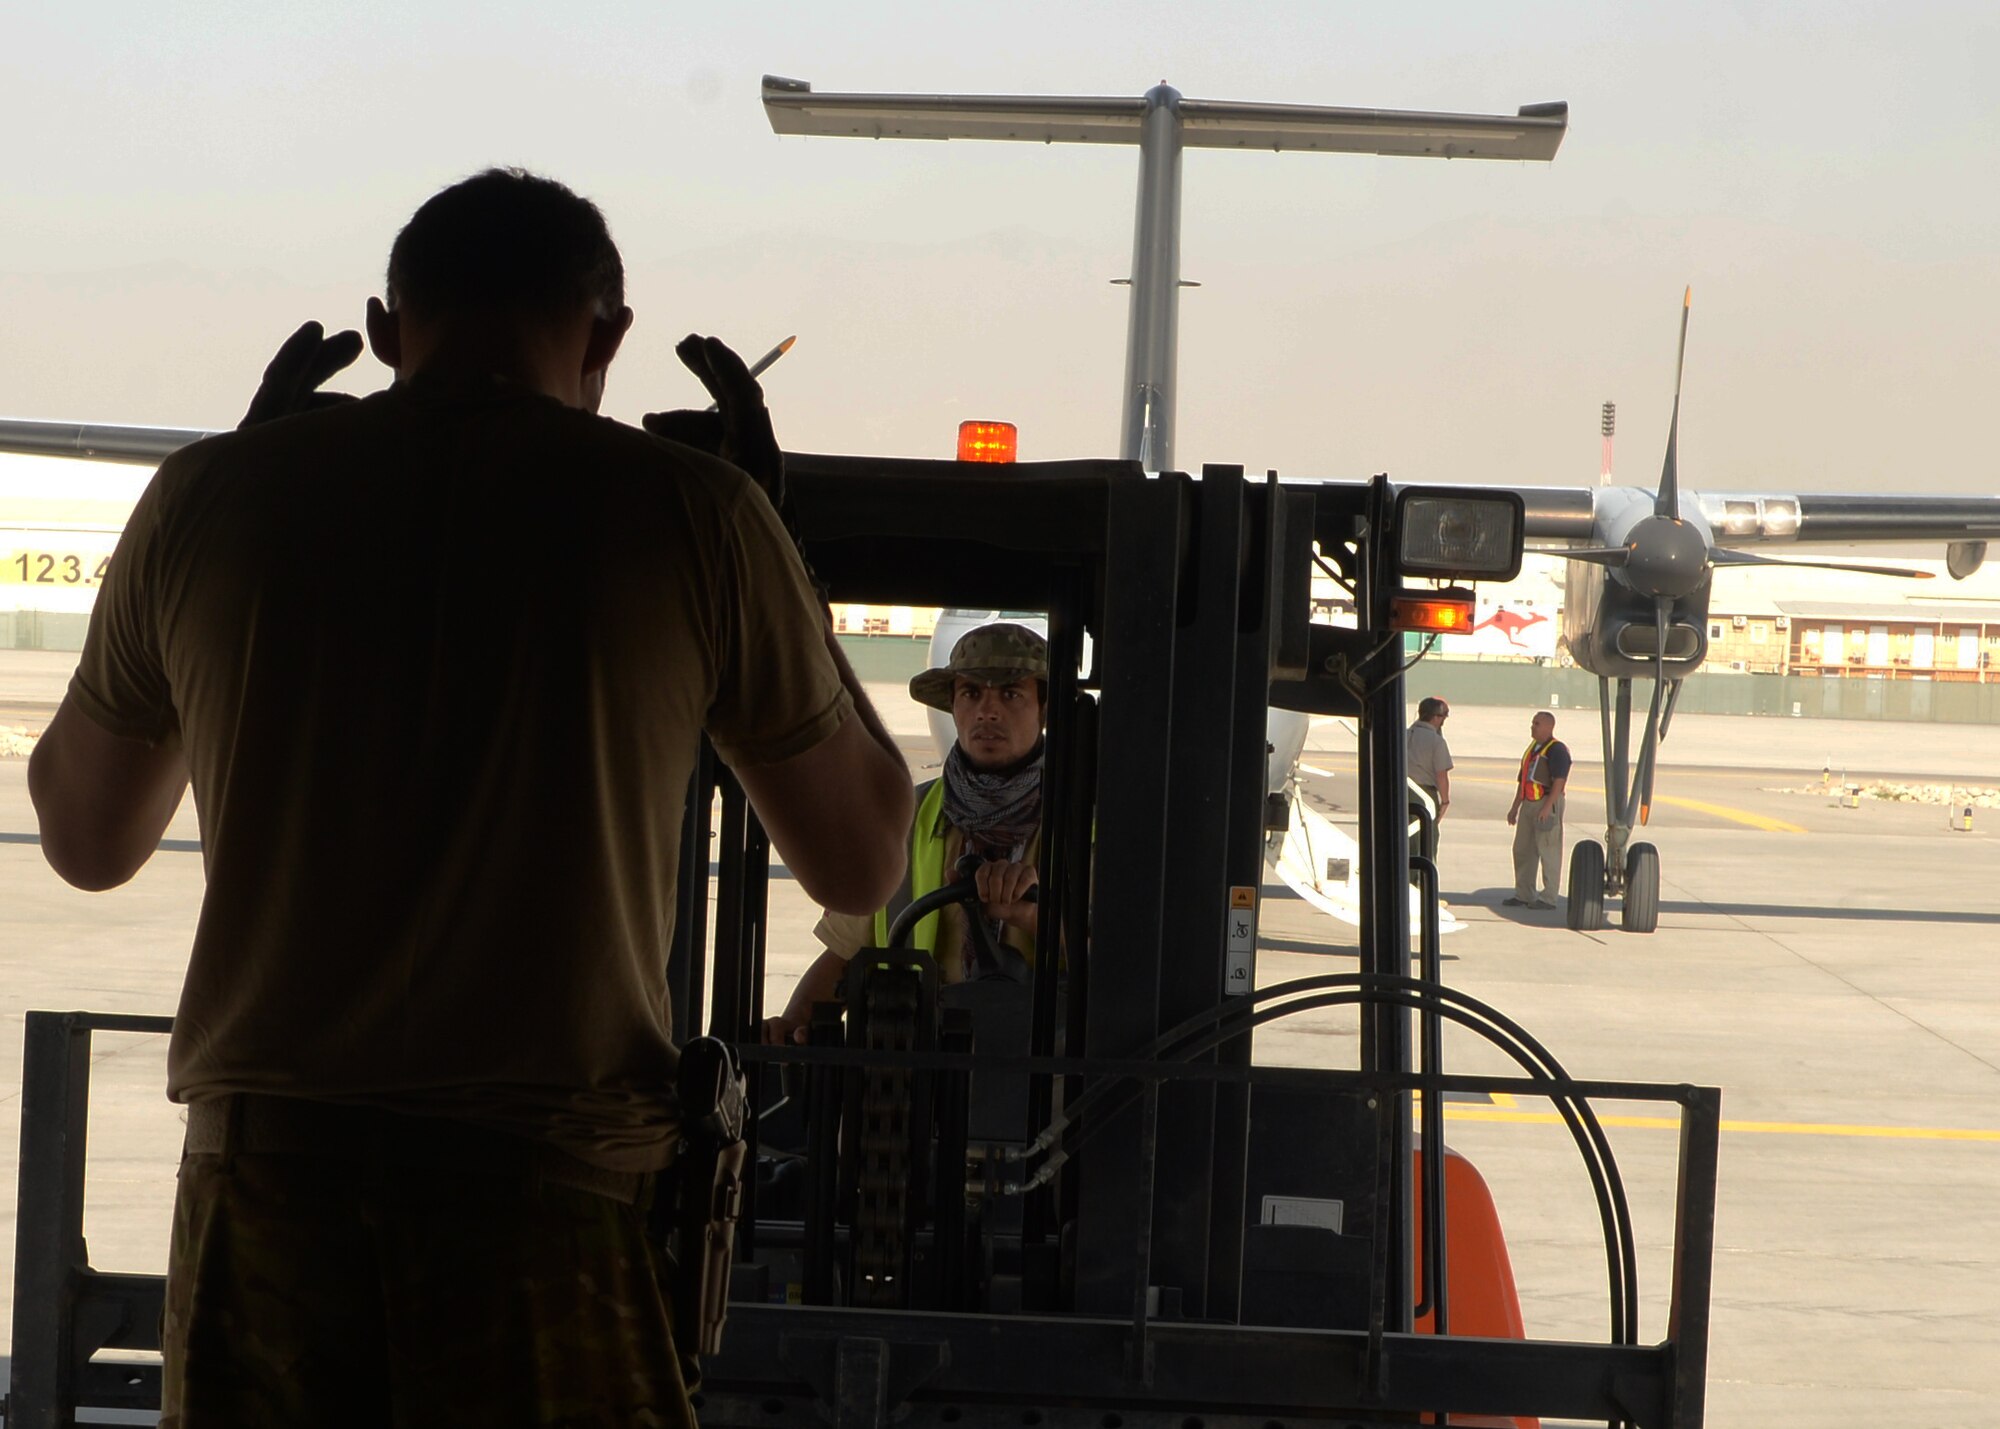 U.S. Air Force Staff Sgt. Casey Strauss, 774th Expeditionary Airlift Squadron C-130J Super Hercules aircraft loadmaster, directs a cargo loader during a shipment pick-up Aug. 28, 2015, at Hamid Karzai International Airport in Kabul, Afghanistan. Strauss and his fellow loadmasters are responsible for loading and unloading cargo, passenger safety in flight, and ensuring the aircraft stays within the proper weight and balance limitations. (U.S. Air Force photo by Senior Airman Cierra Presentado/Released)